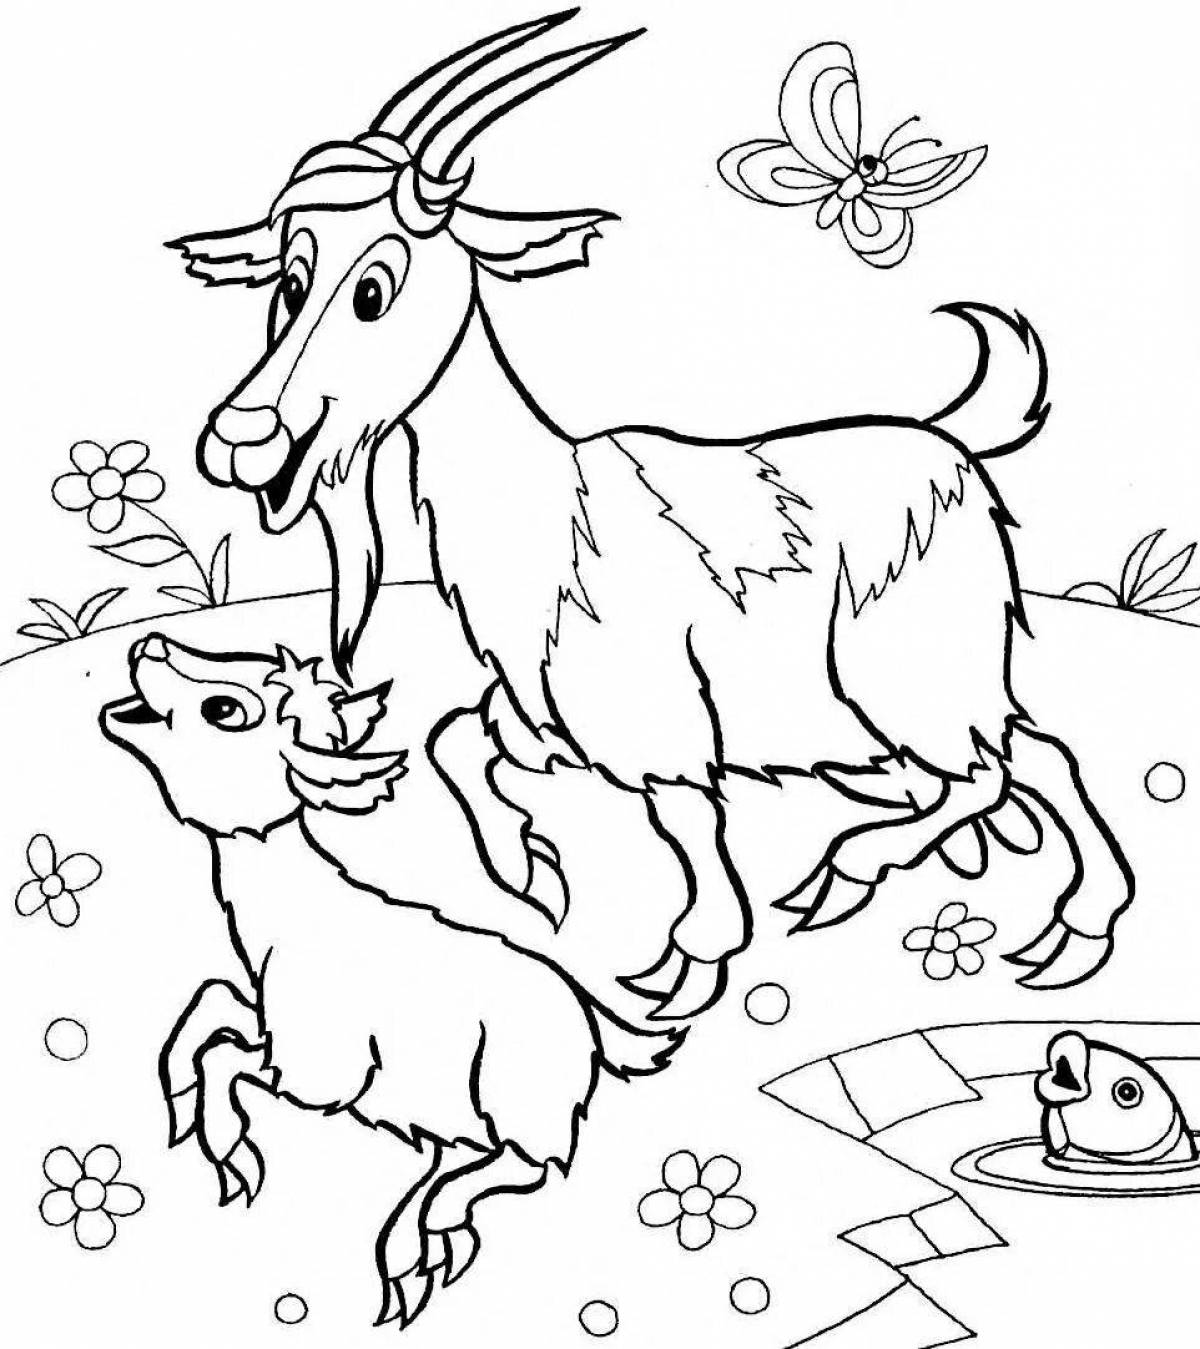 Adorable pet coloring pages for kids